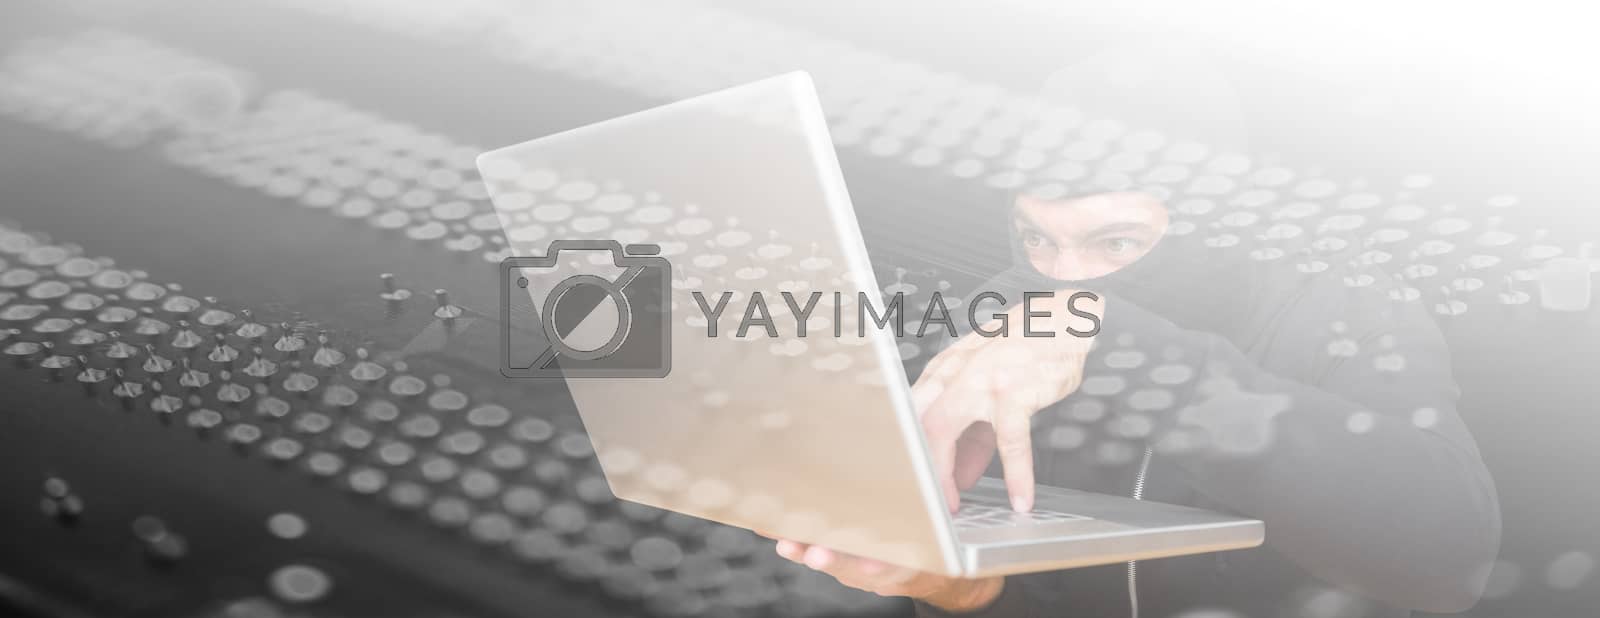 Royalty free image of Composite image of hacker using laptop to steal identity at desk by Wavebreakmedia